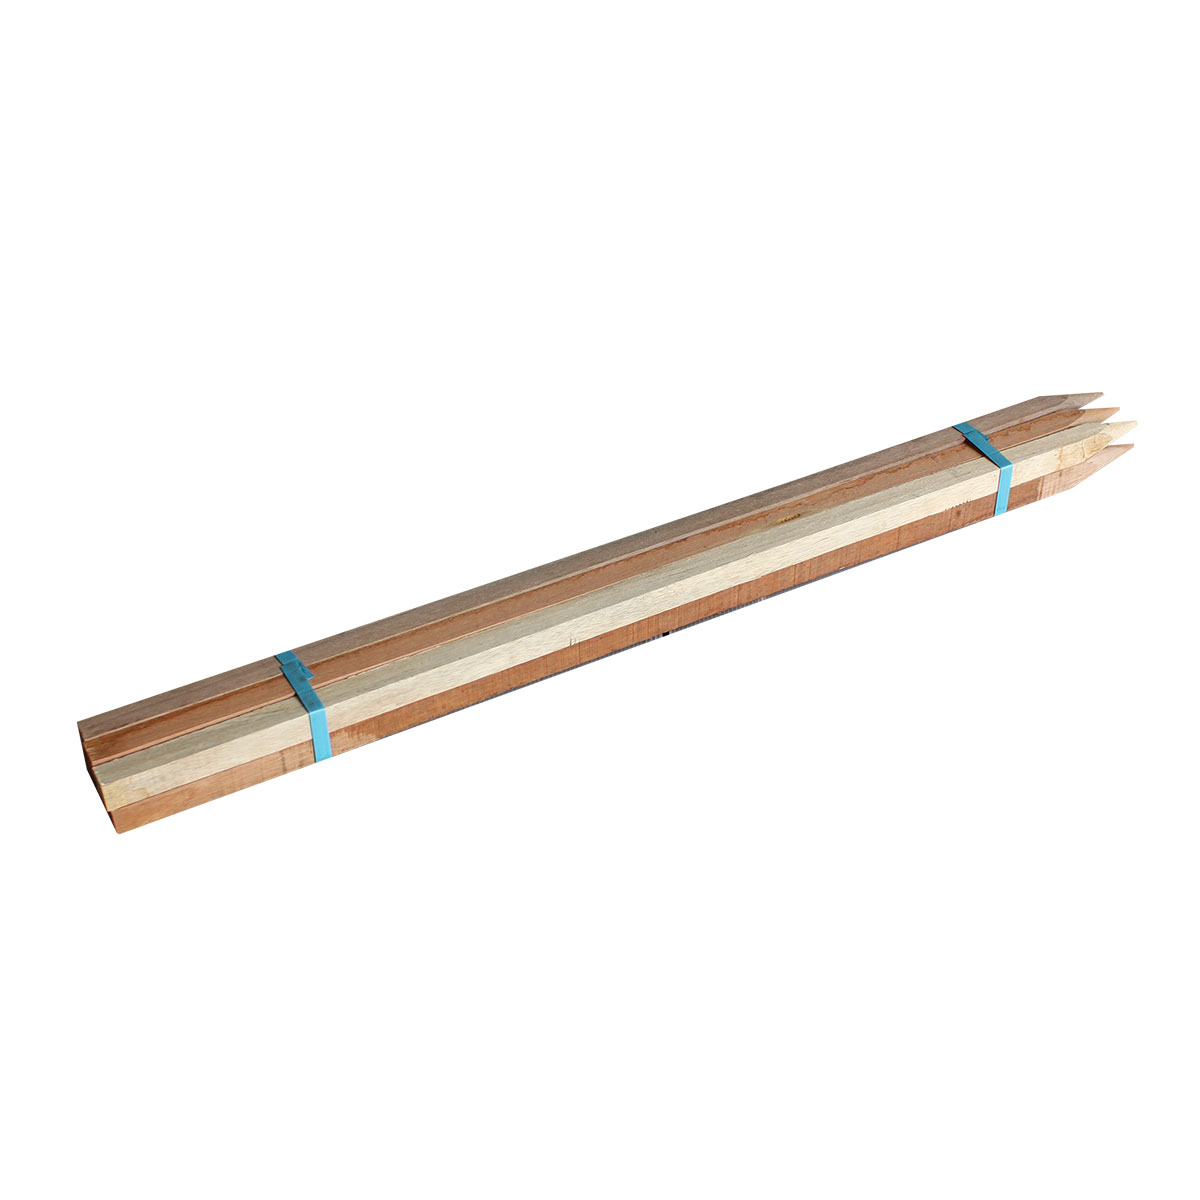 Hardwood Stakes 25 x 25 x 1200mm - 6 Pack